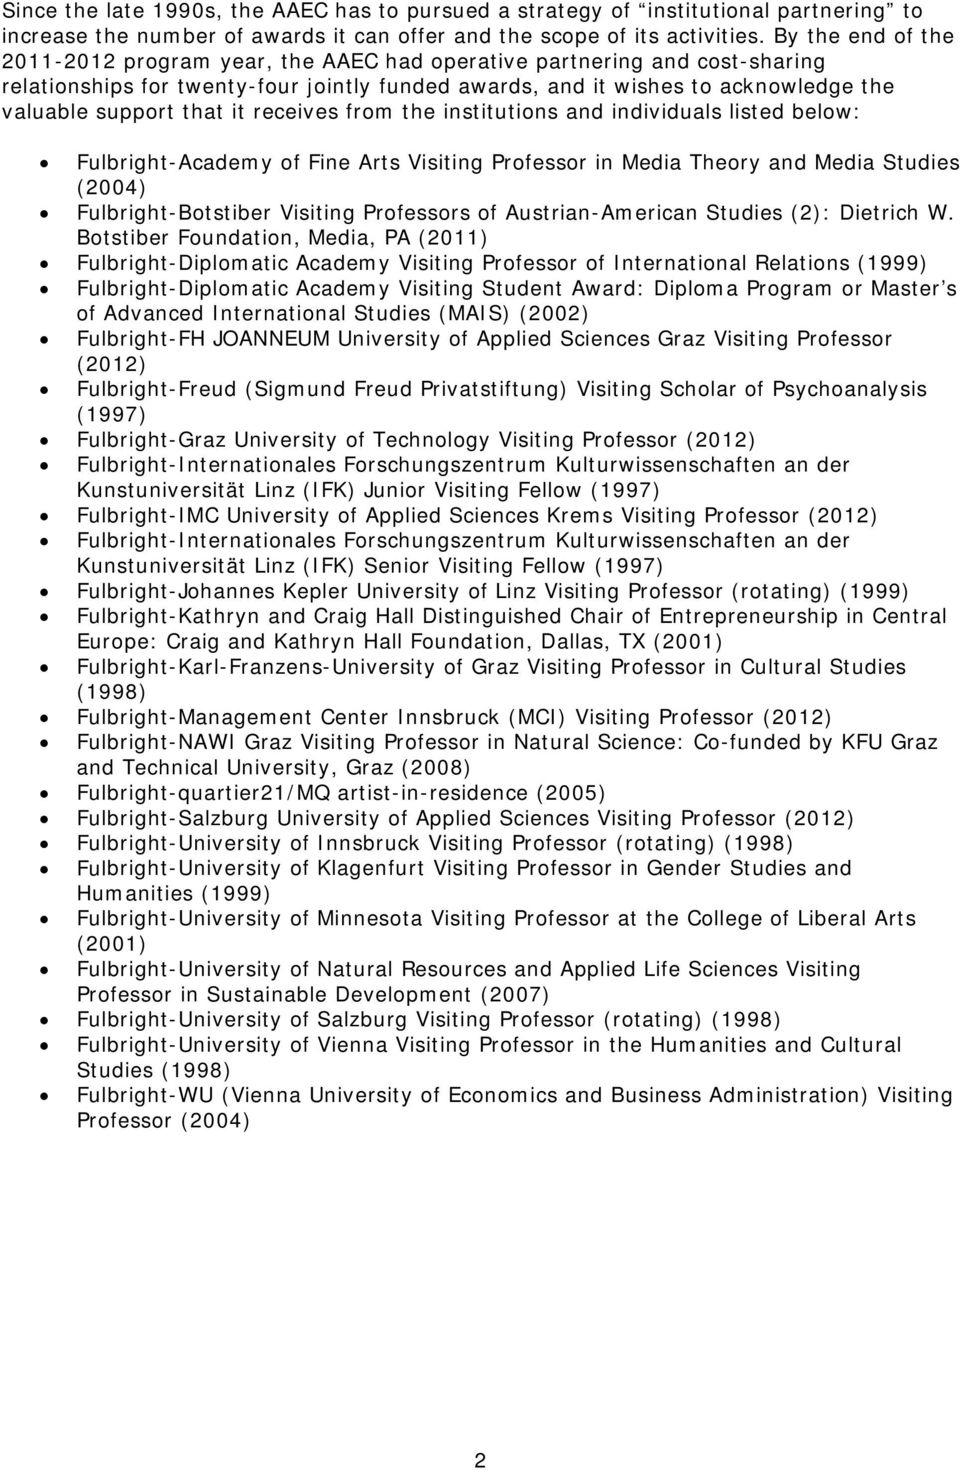 that it receives from the institutions and individuals listed below: Fulbright-Academy of Fine Arts Visiting Professor in Media Theory and Media Studies (2004) Fulbright-Botstiber Visiting Professors